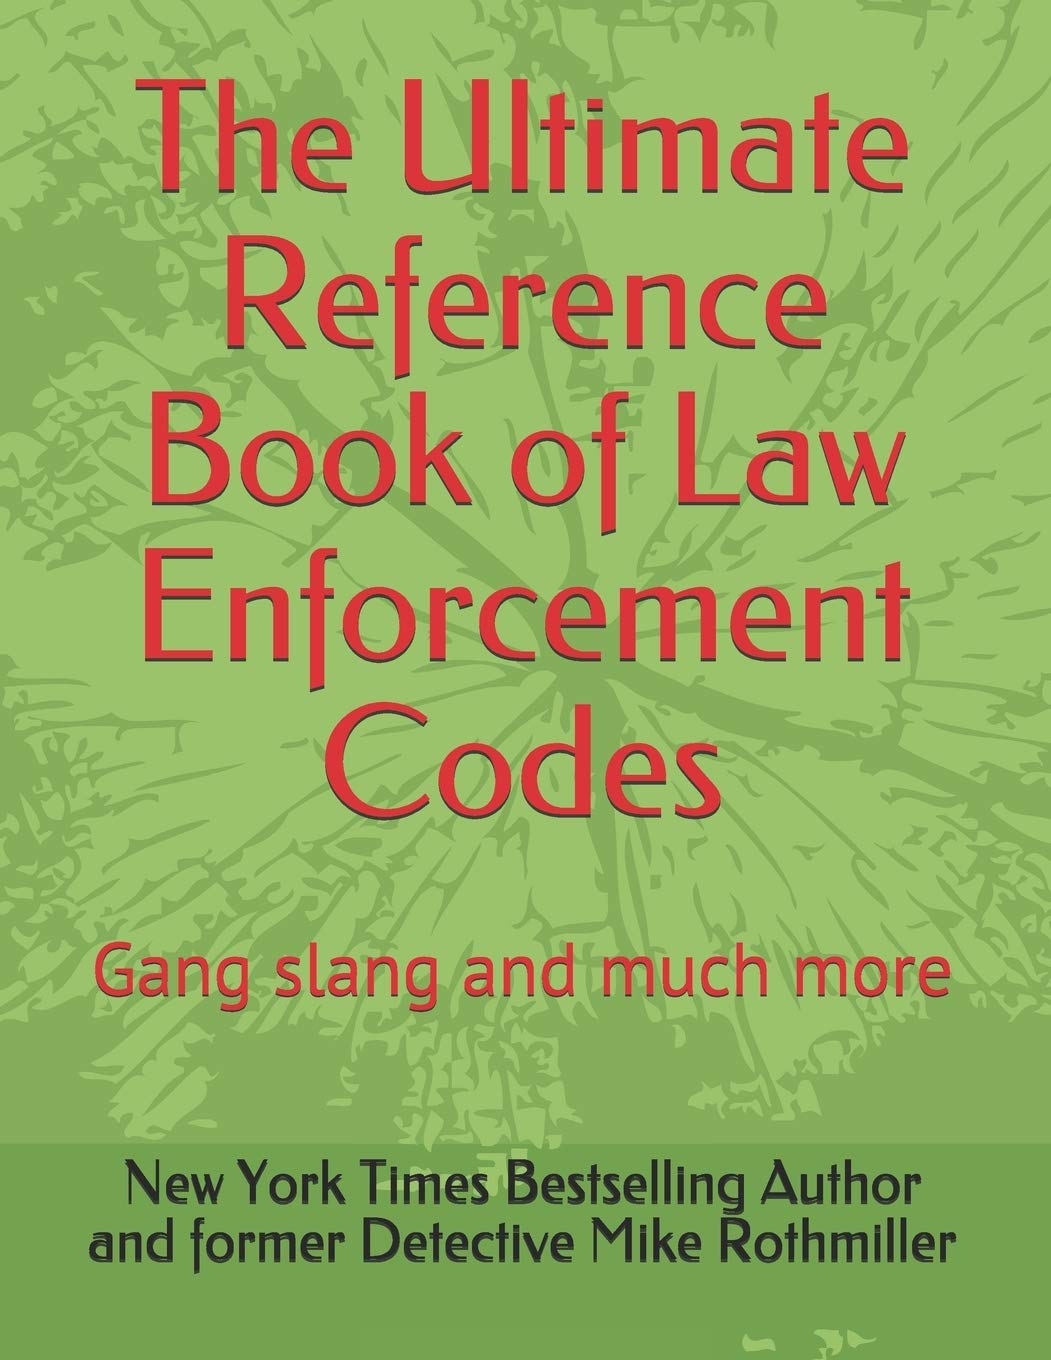 The ultimate reference book of law...